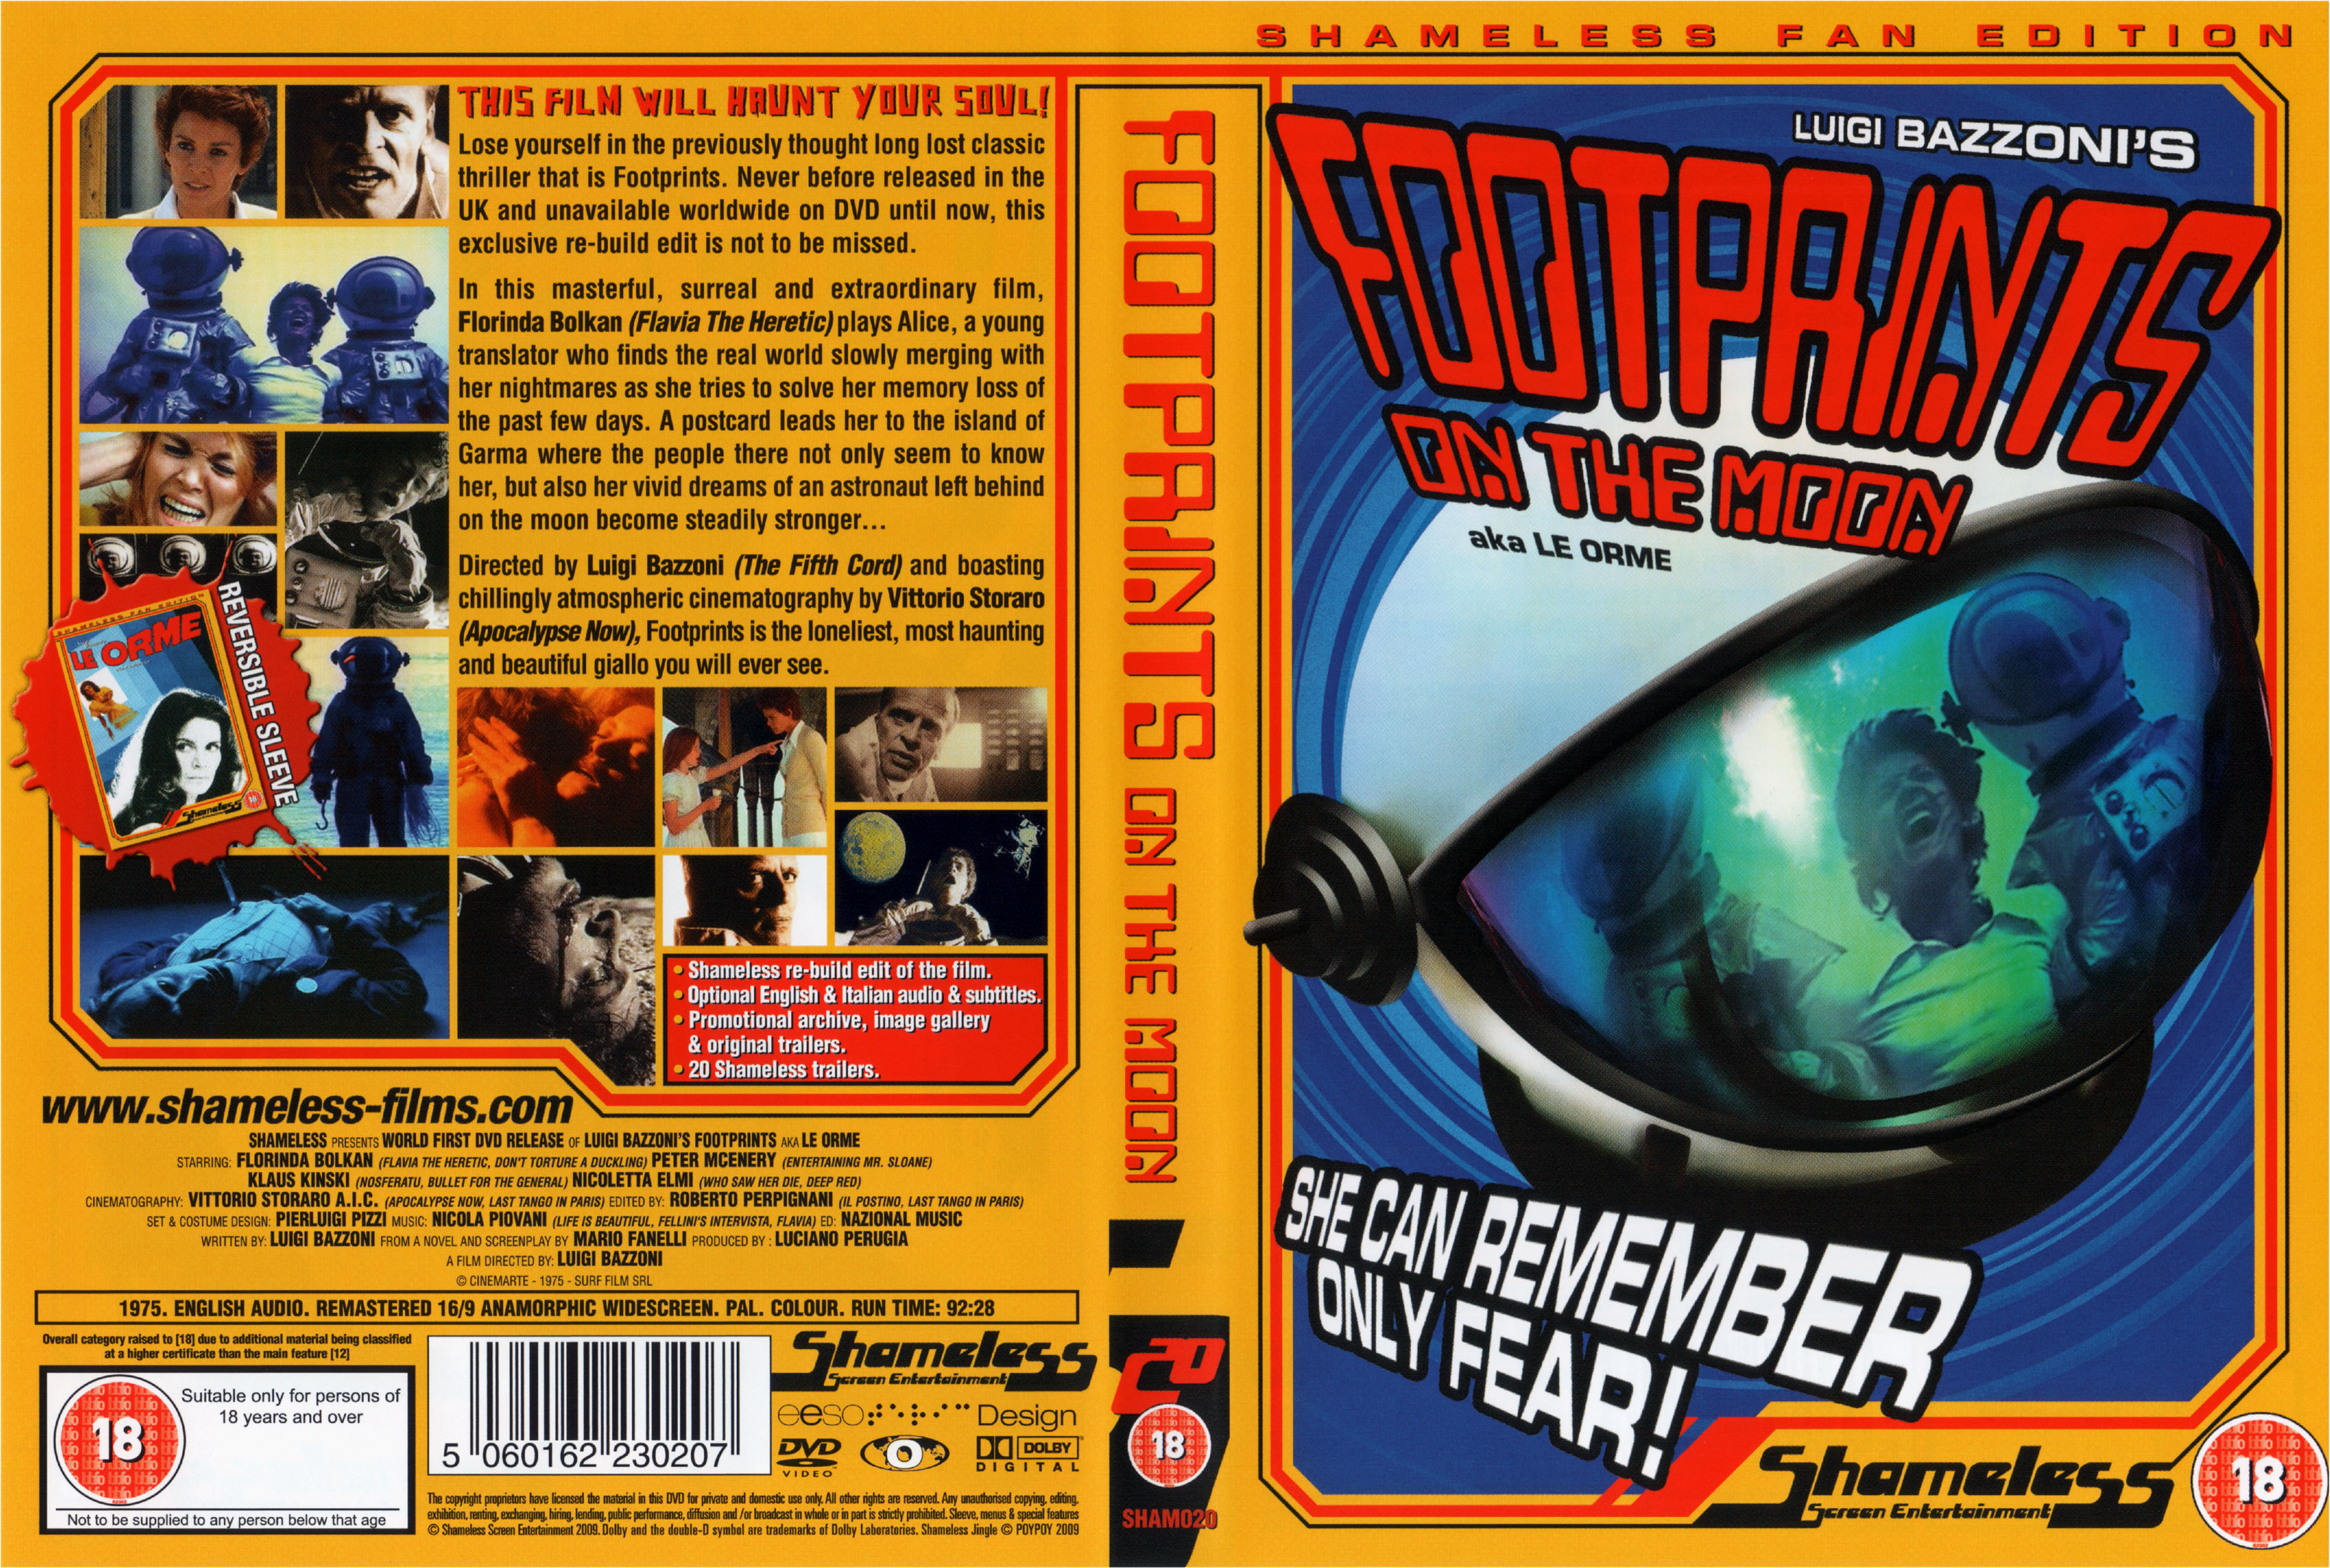 Jaquette DVD Footprints on the moon Zone 1